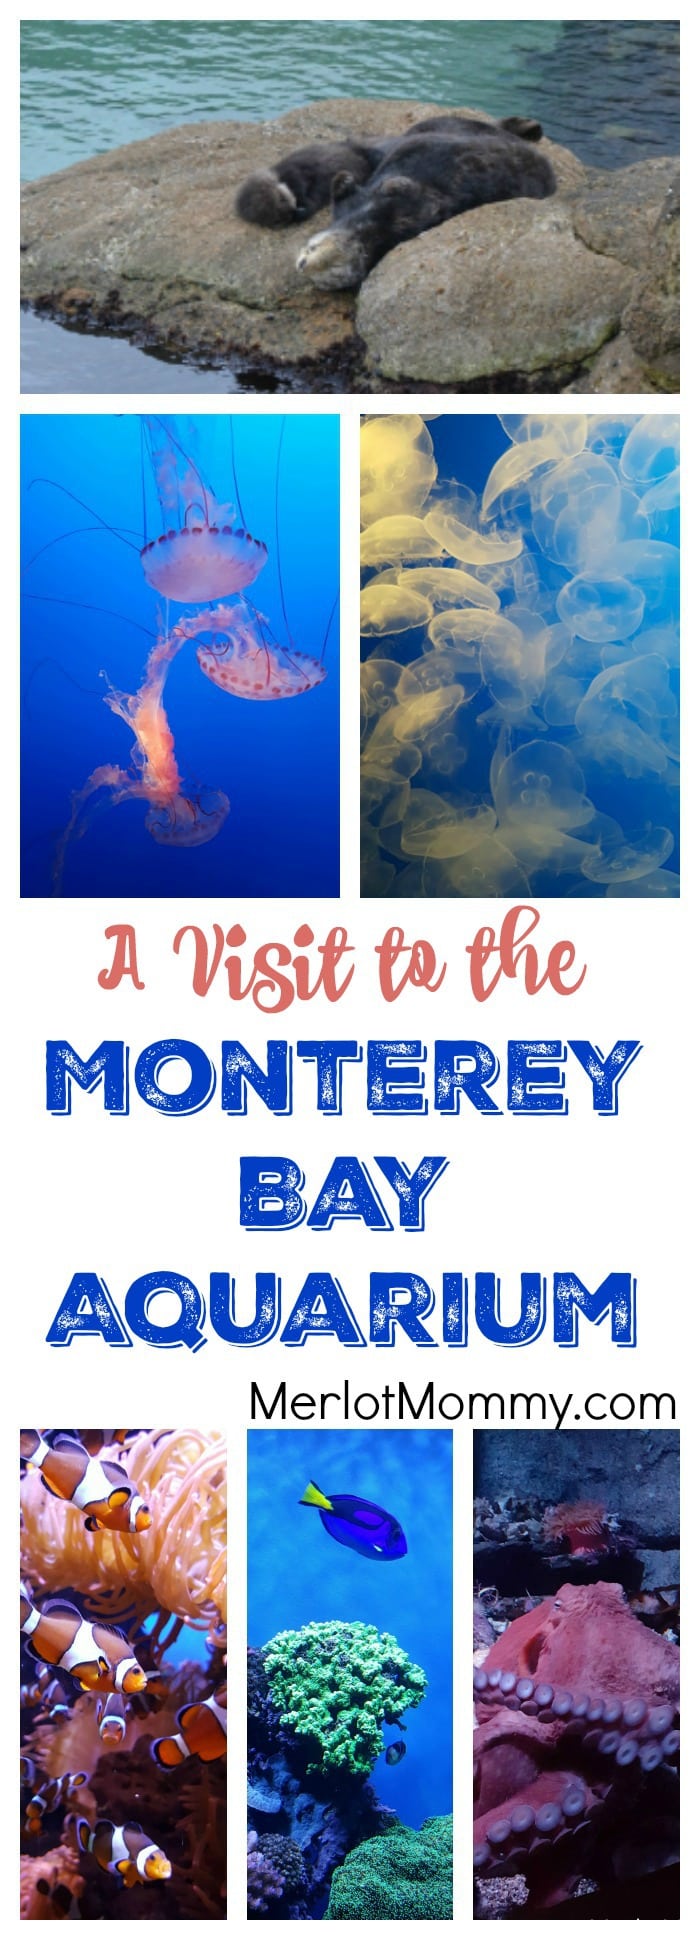 A Visit to the Monterey Bay Aquarium for Finding Dory